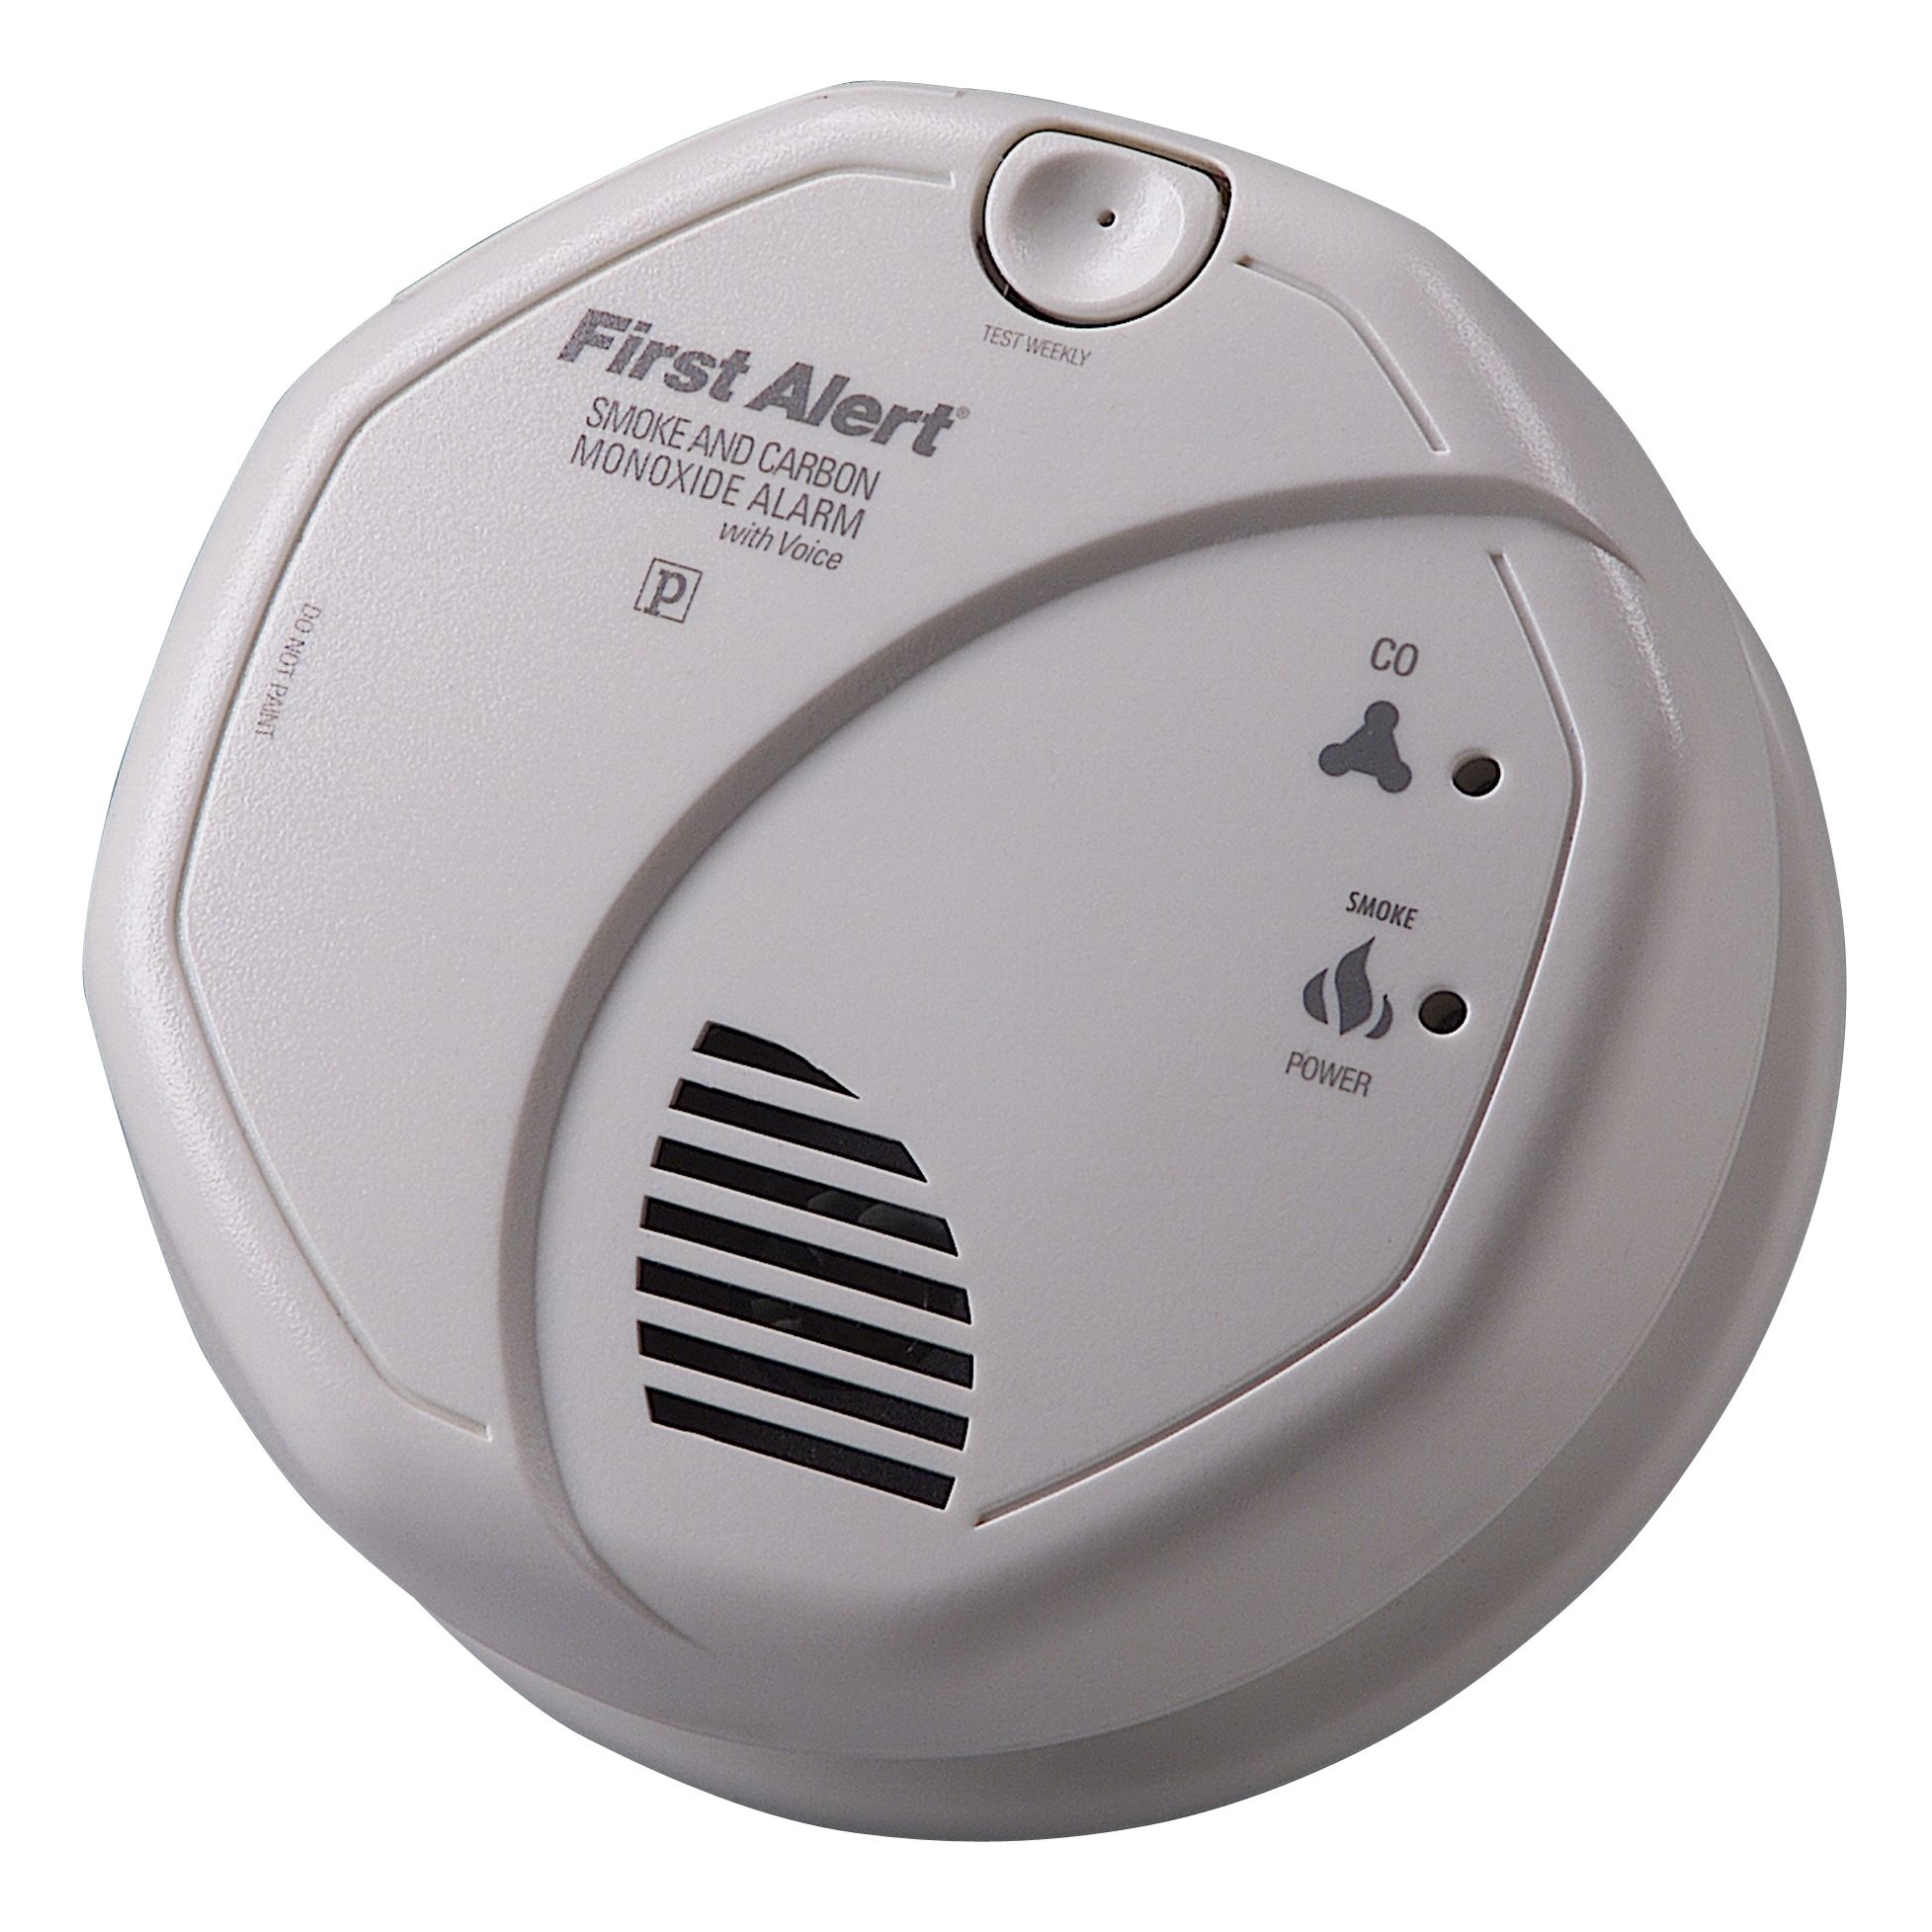 How can you tell if your carbon monoxide detector is working?